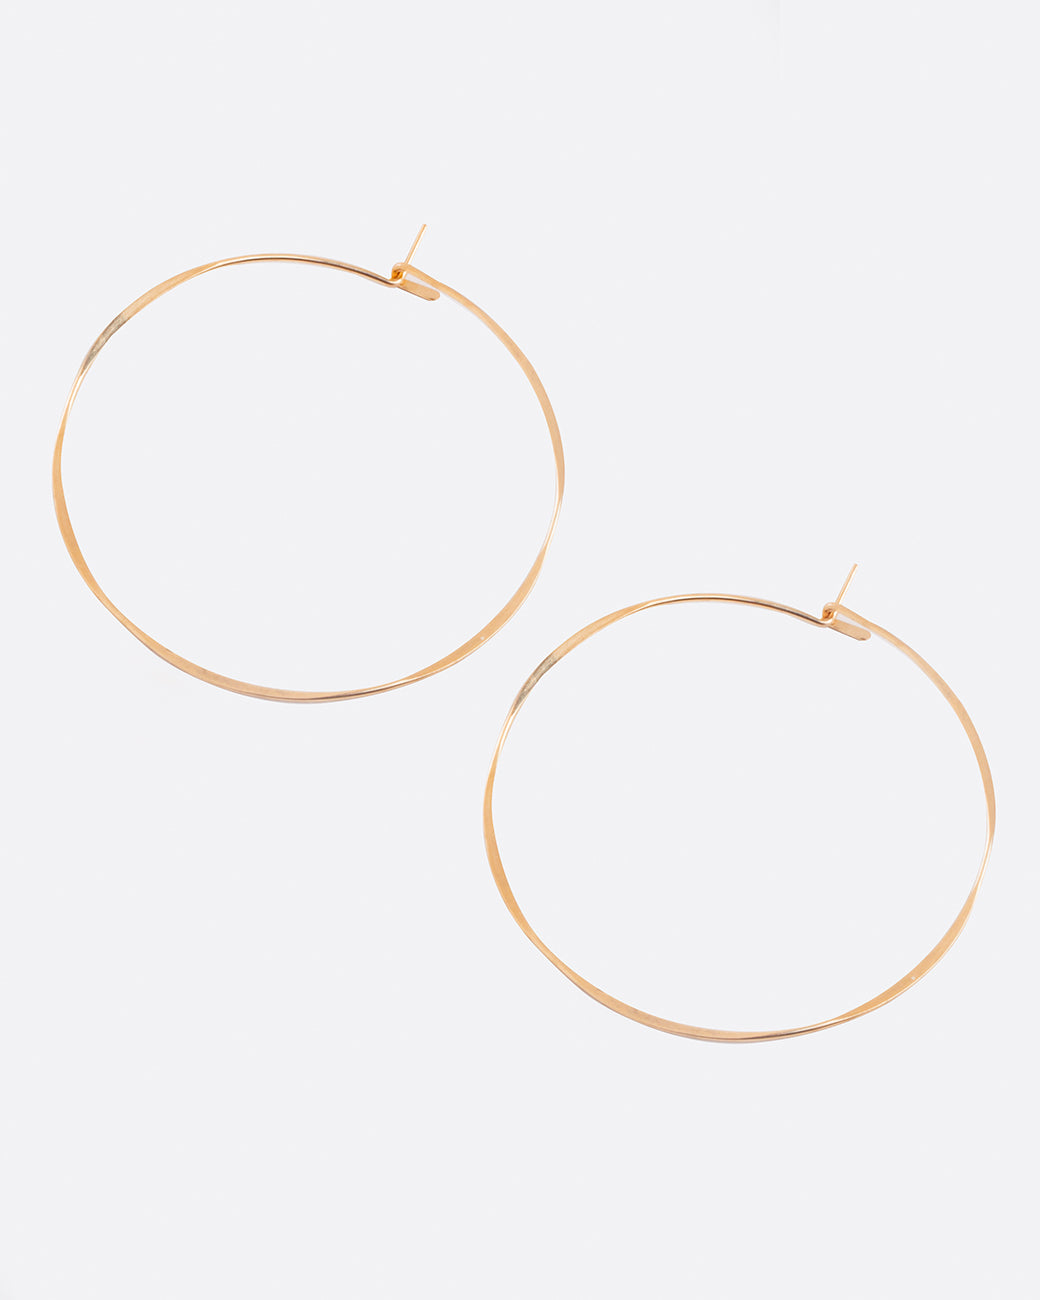 Fairmined gold, hand-hammered, large round hoop earrings that close upon themselves.